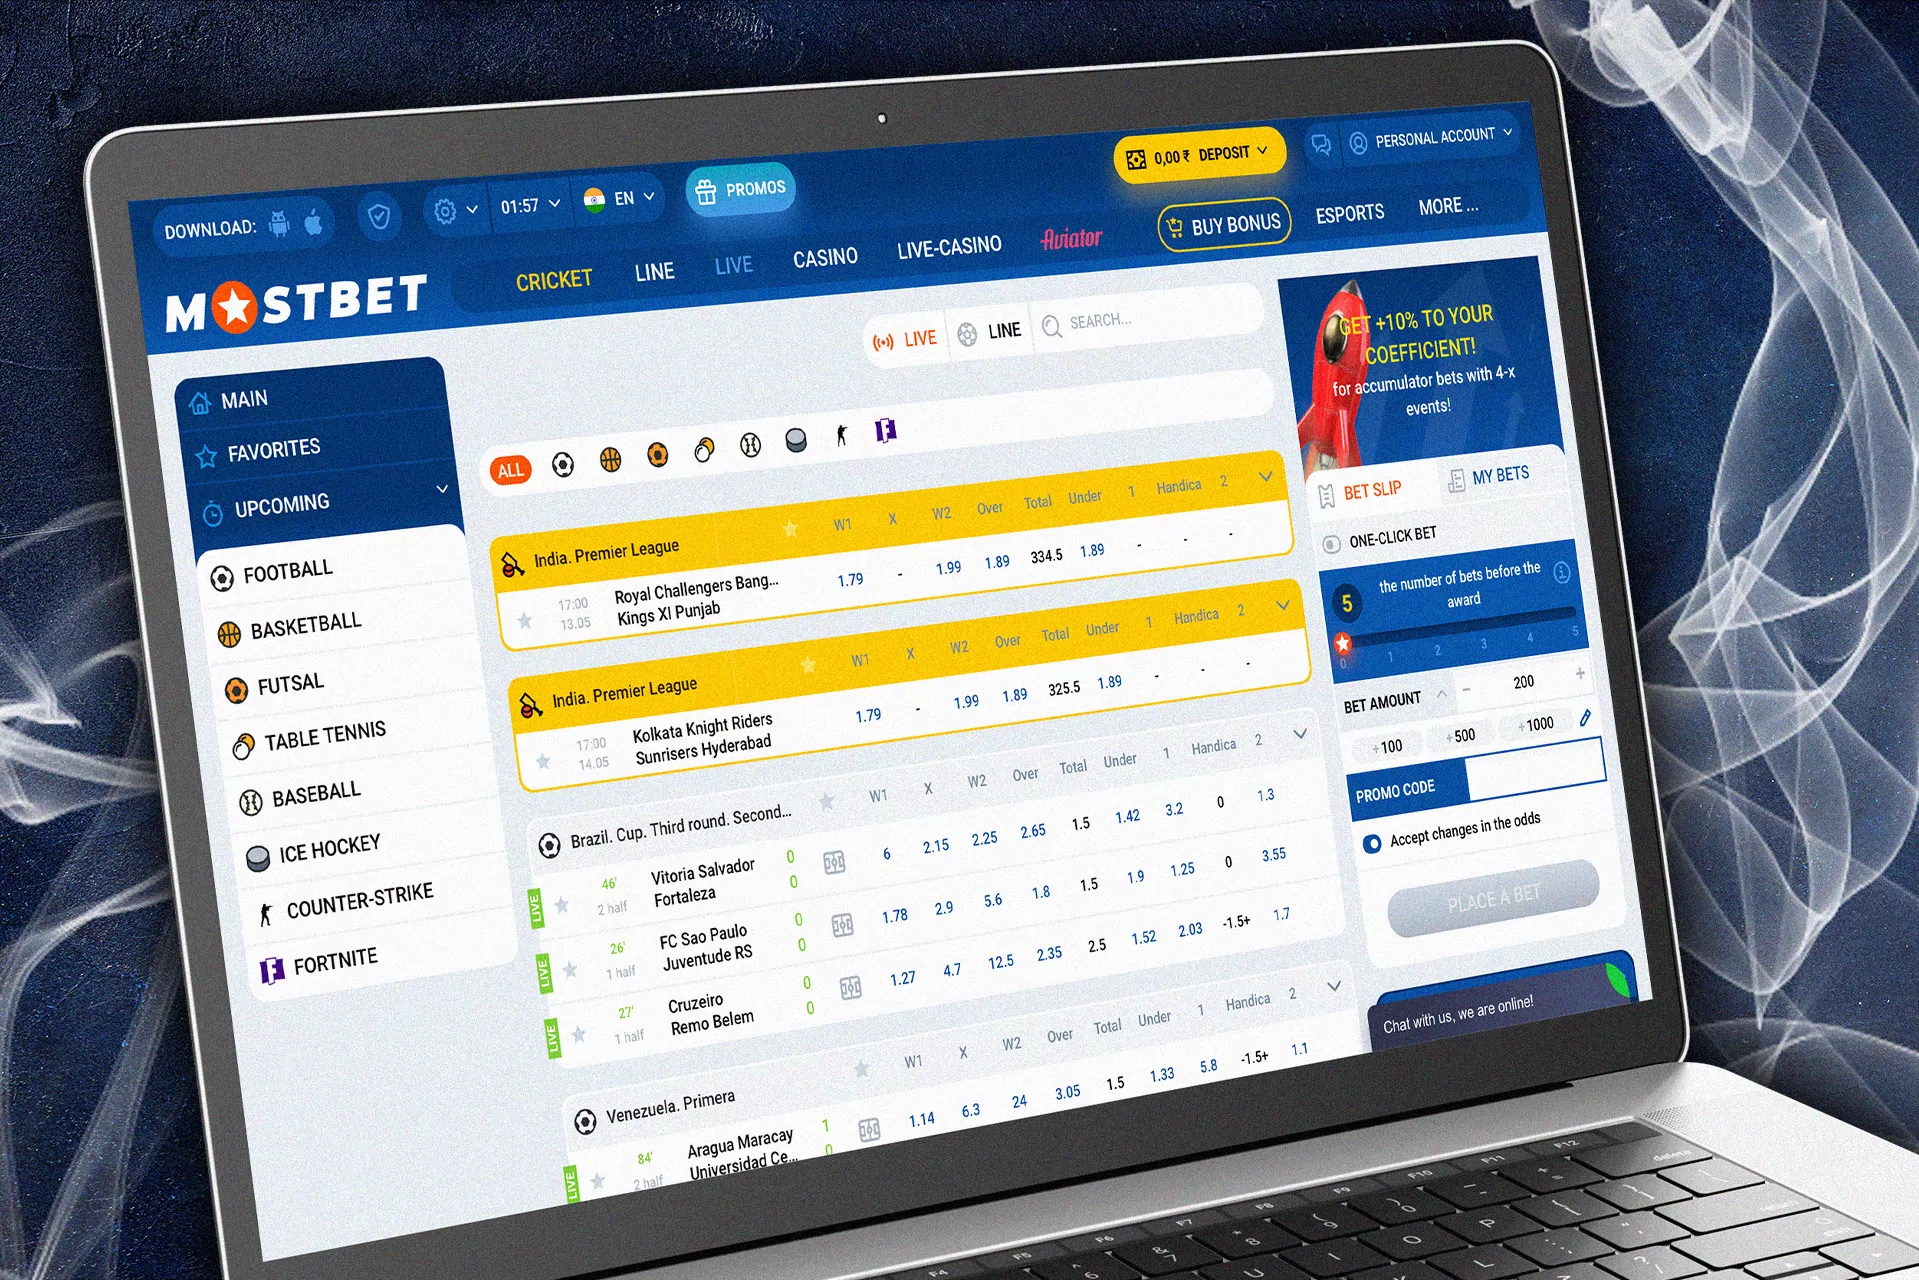 At Mostbet, bet on matches in the live streaming.